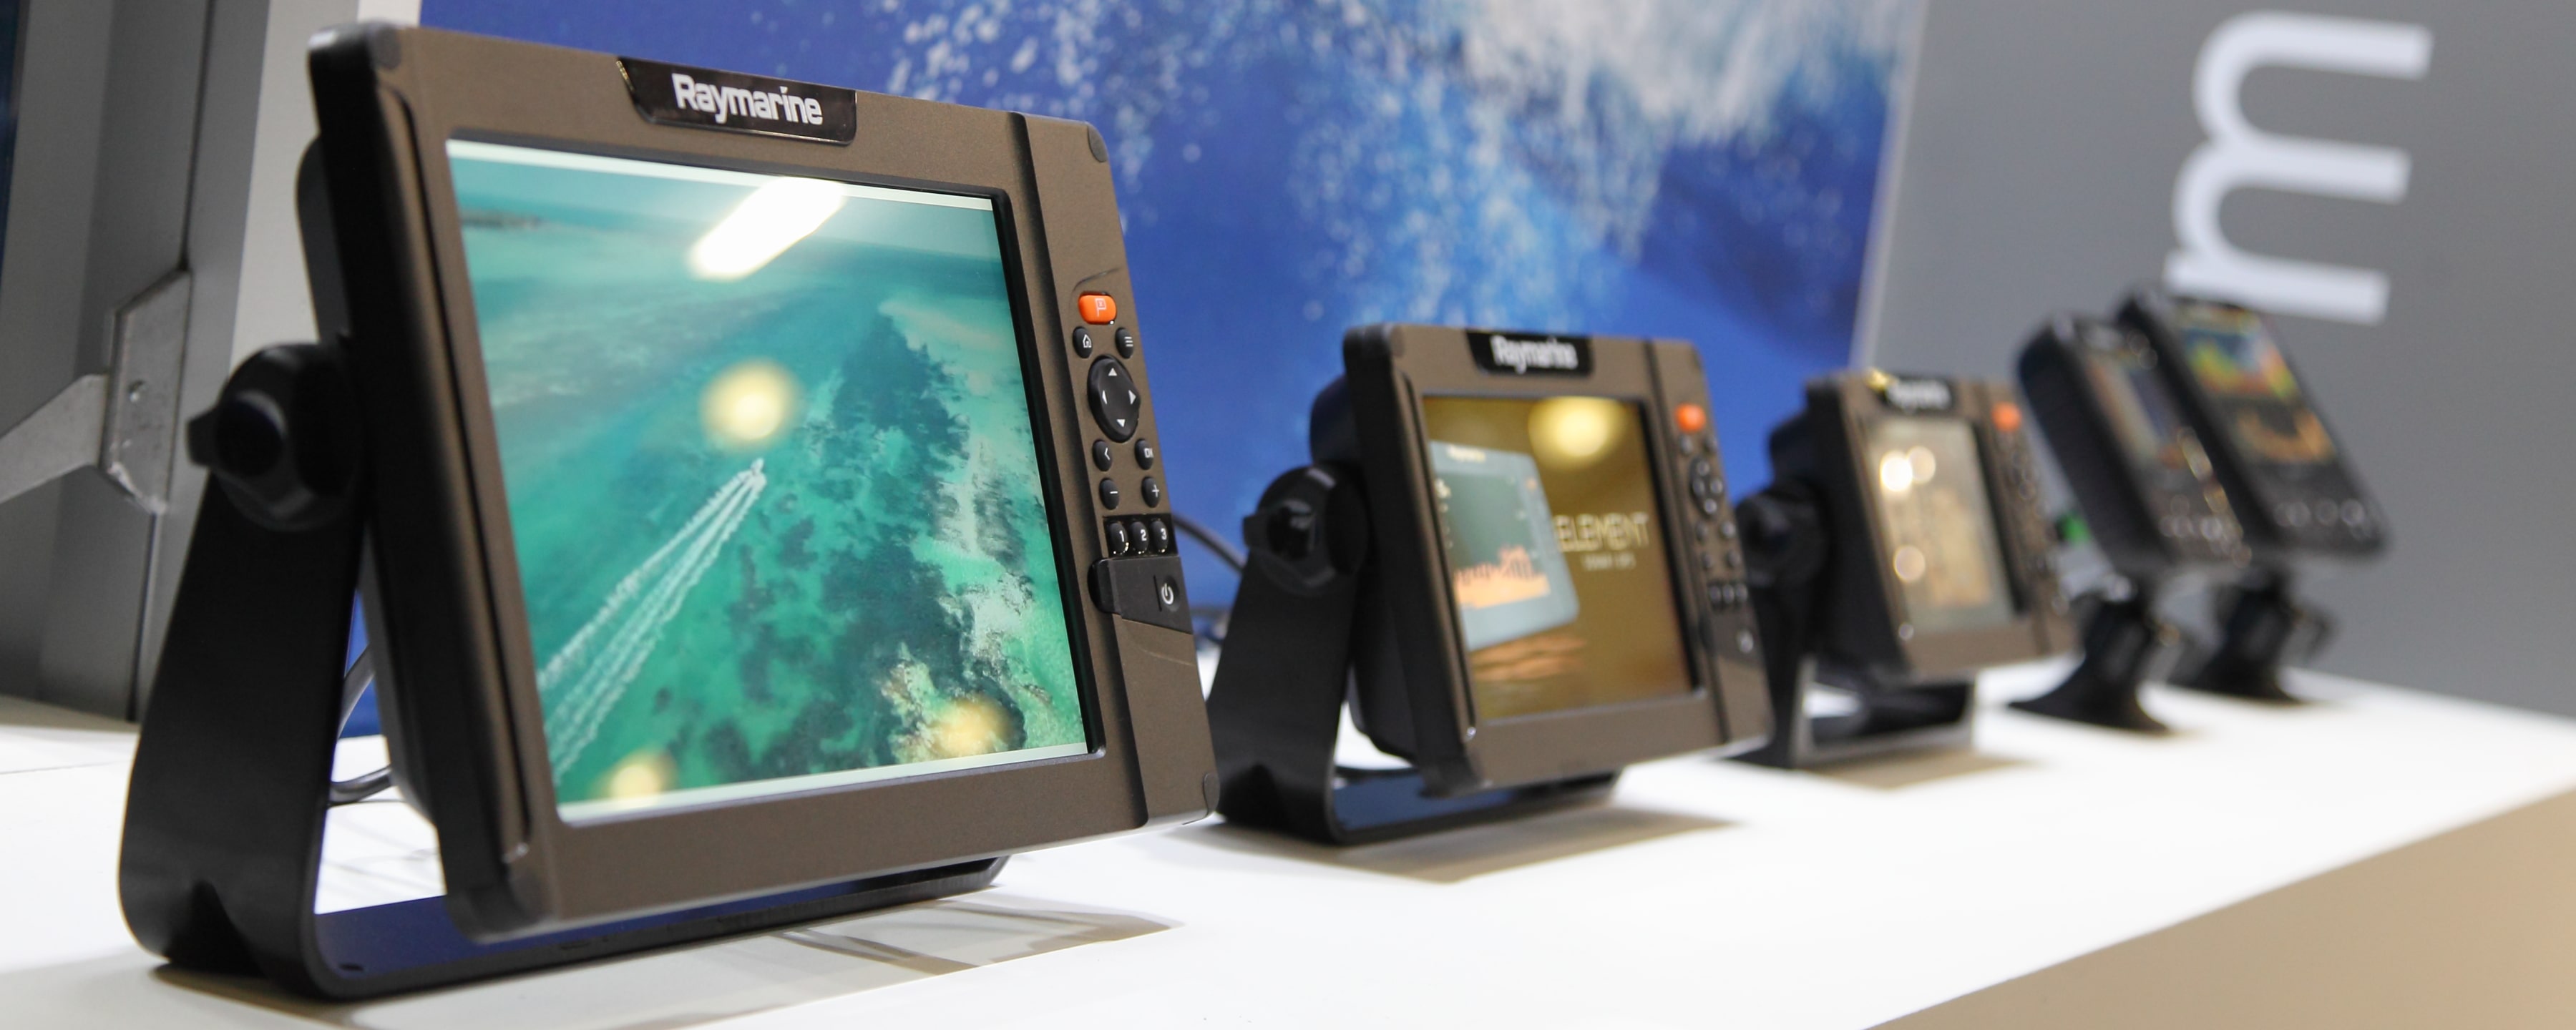 Raymarine Element Range: Review and Guide